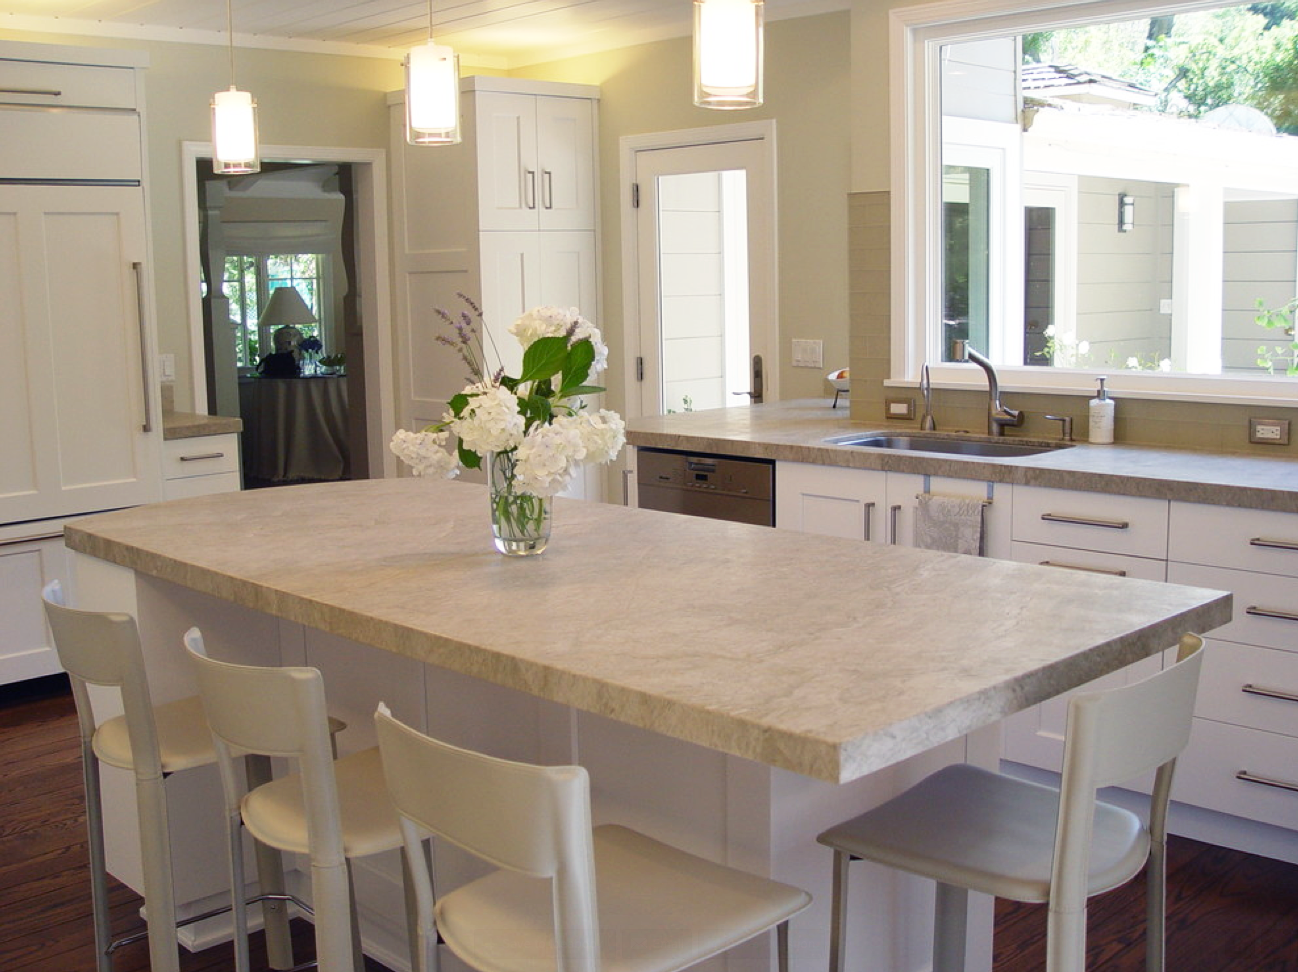 Corian solid surface countertops.